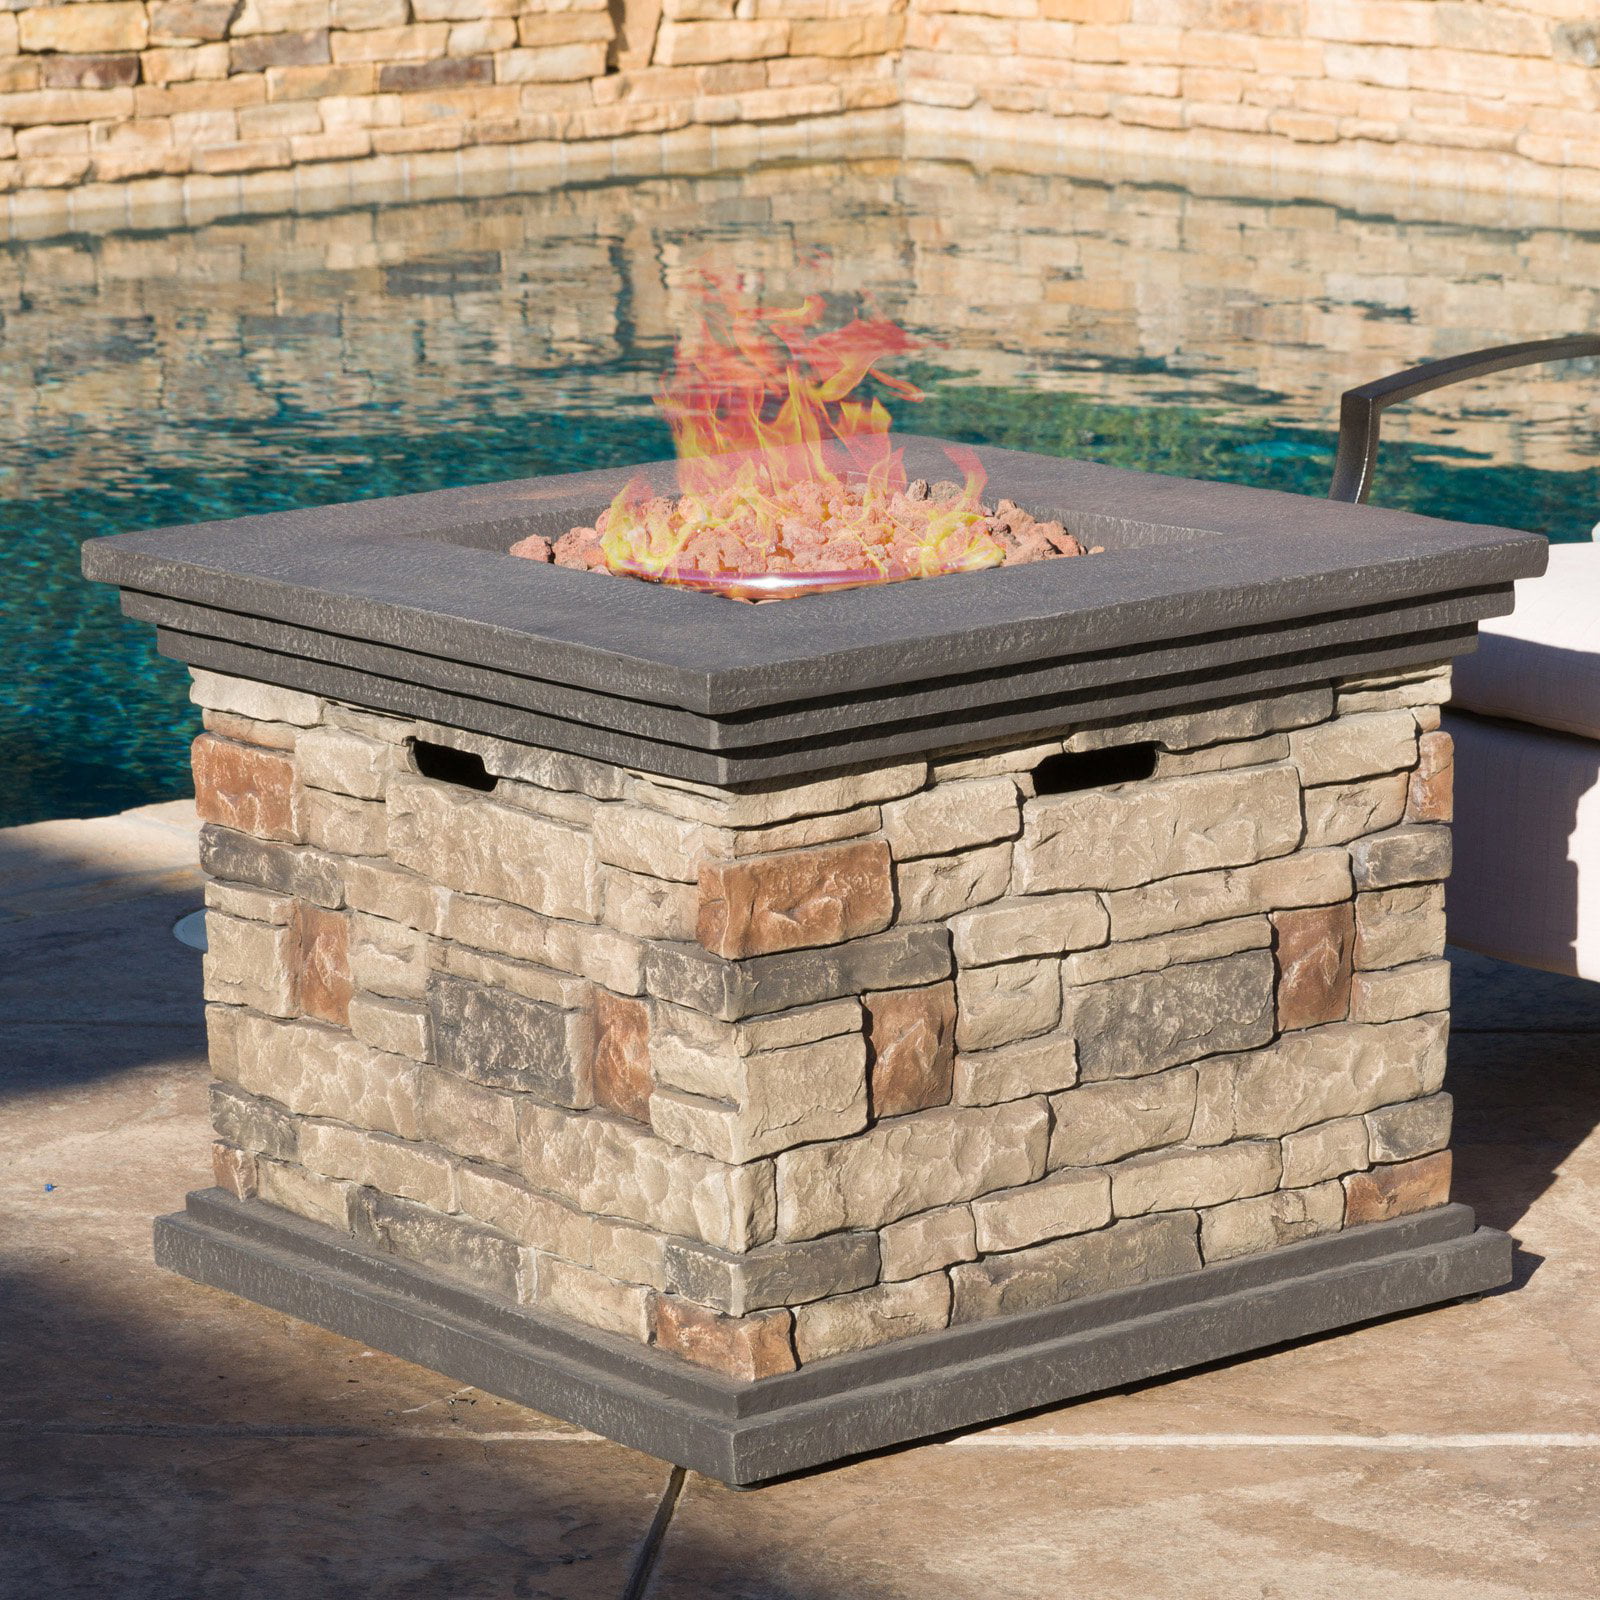 Gas Fire Pit Square Propane pits firepit crawford gdfstudio fireplaces shareasale